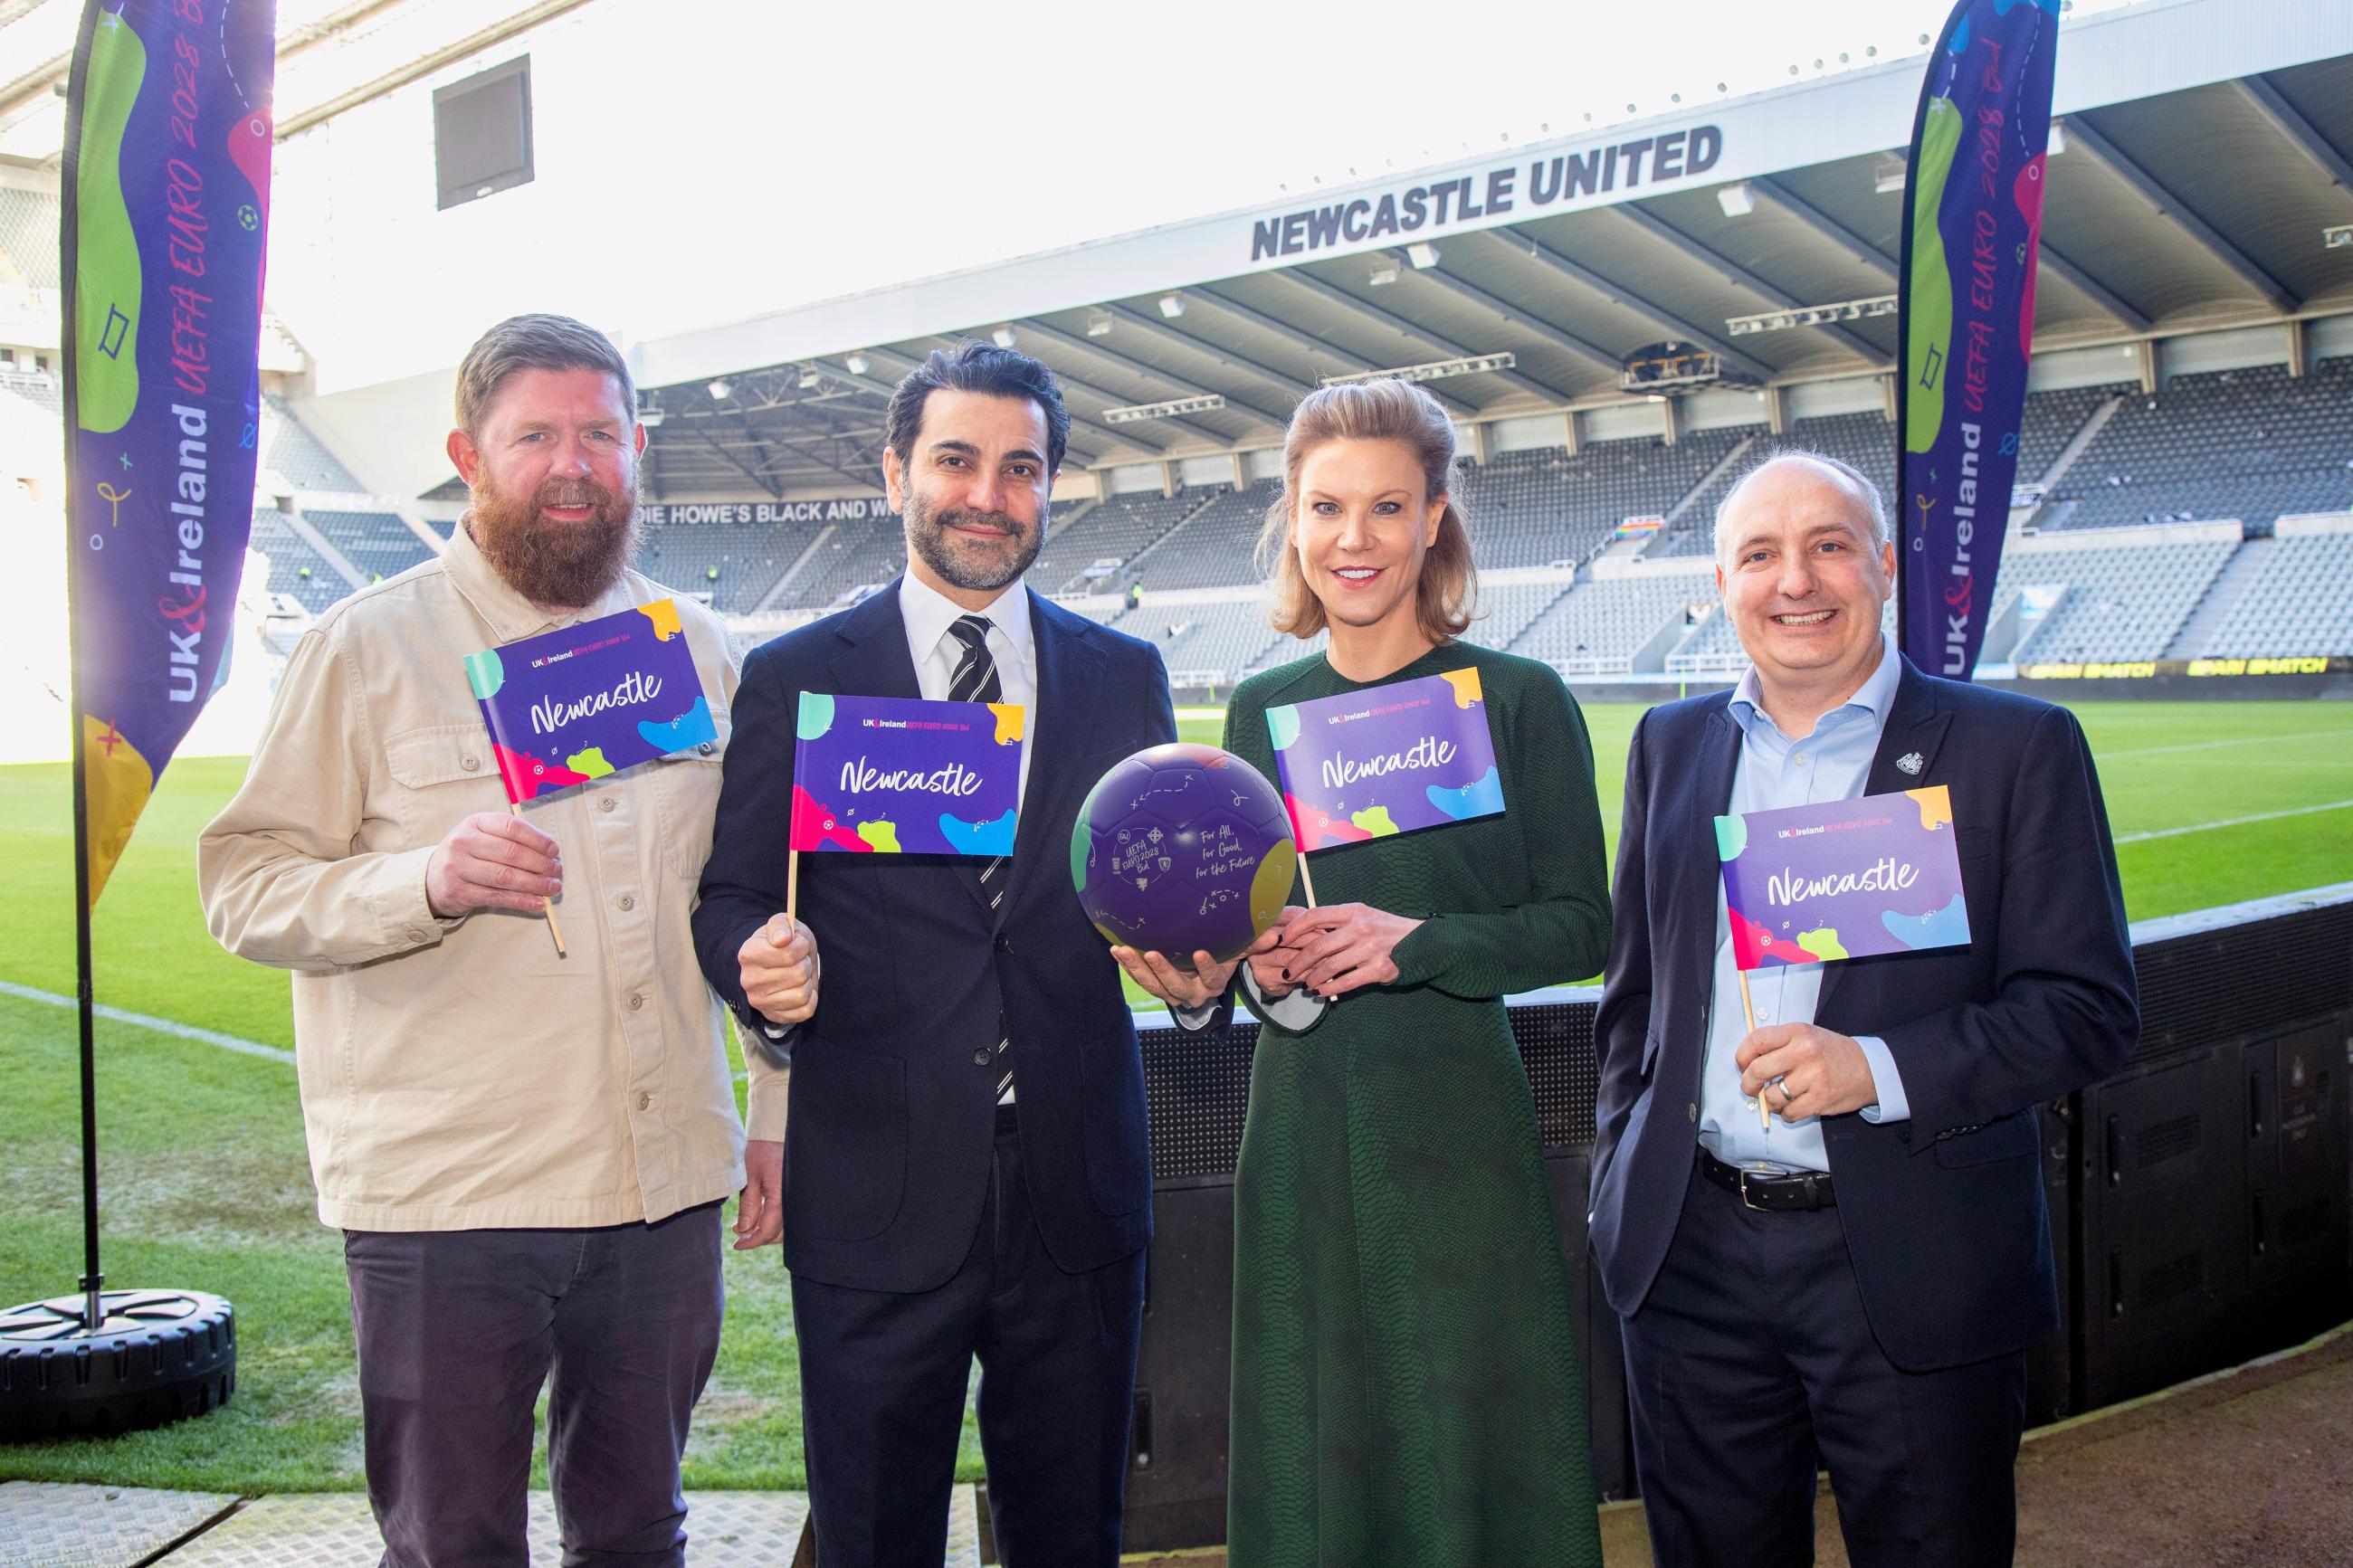 Jim Mawdsley (Events and Culture Newcastle City Council), Mehrdad Ghodoussi (Newcastle United co-owner), Amanda Staveley (Newcastle United co-owner), and Darren Eales (Newcastle United CEO)